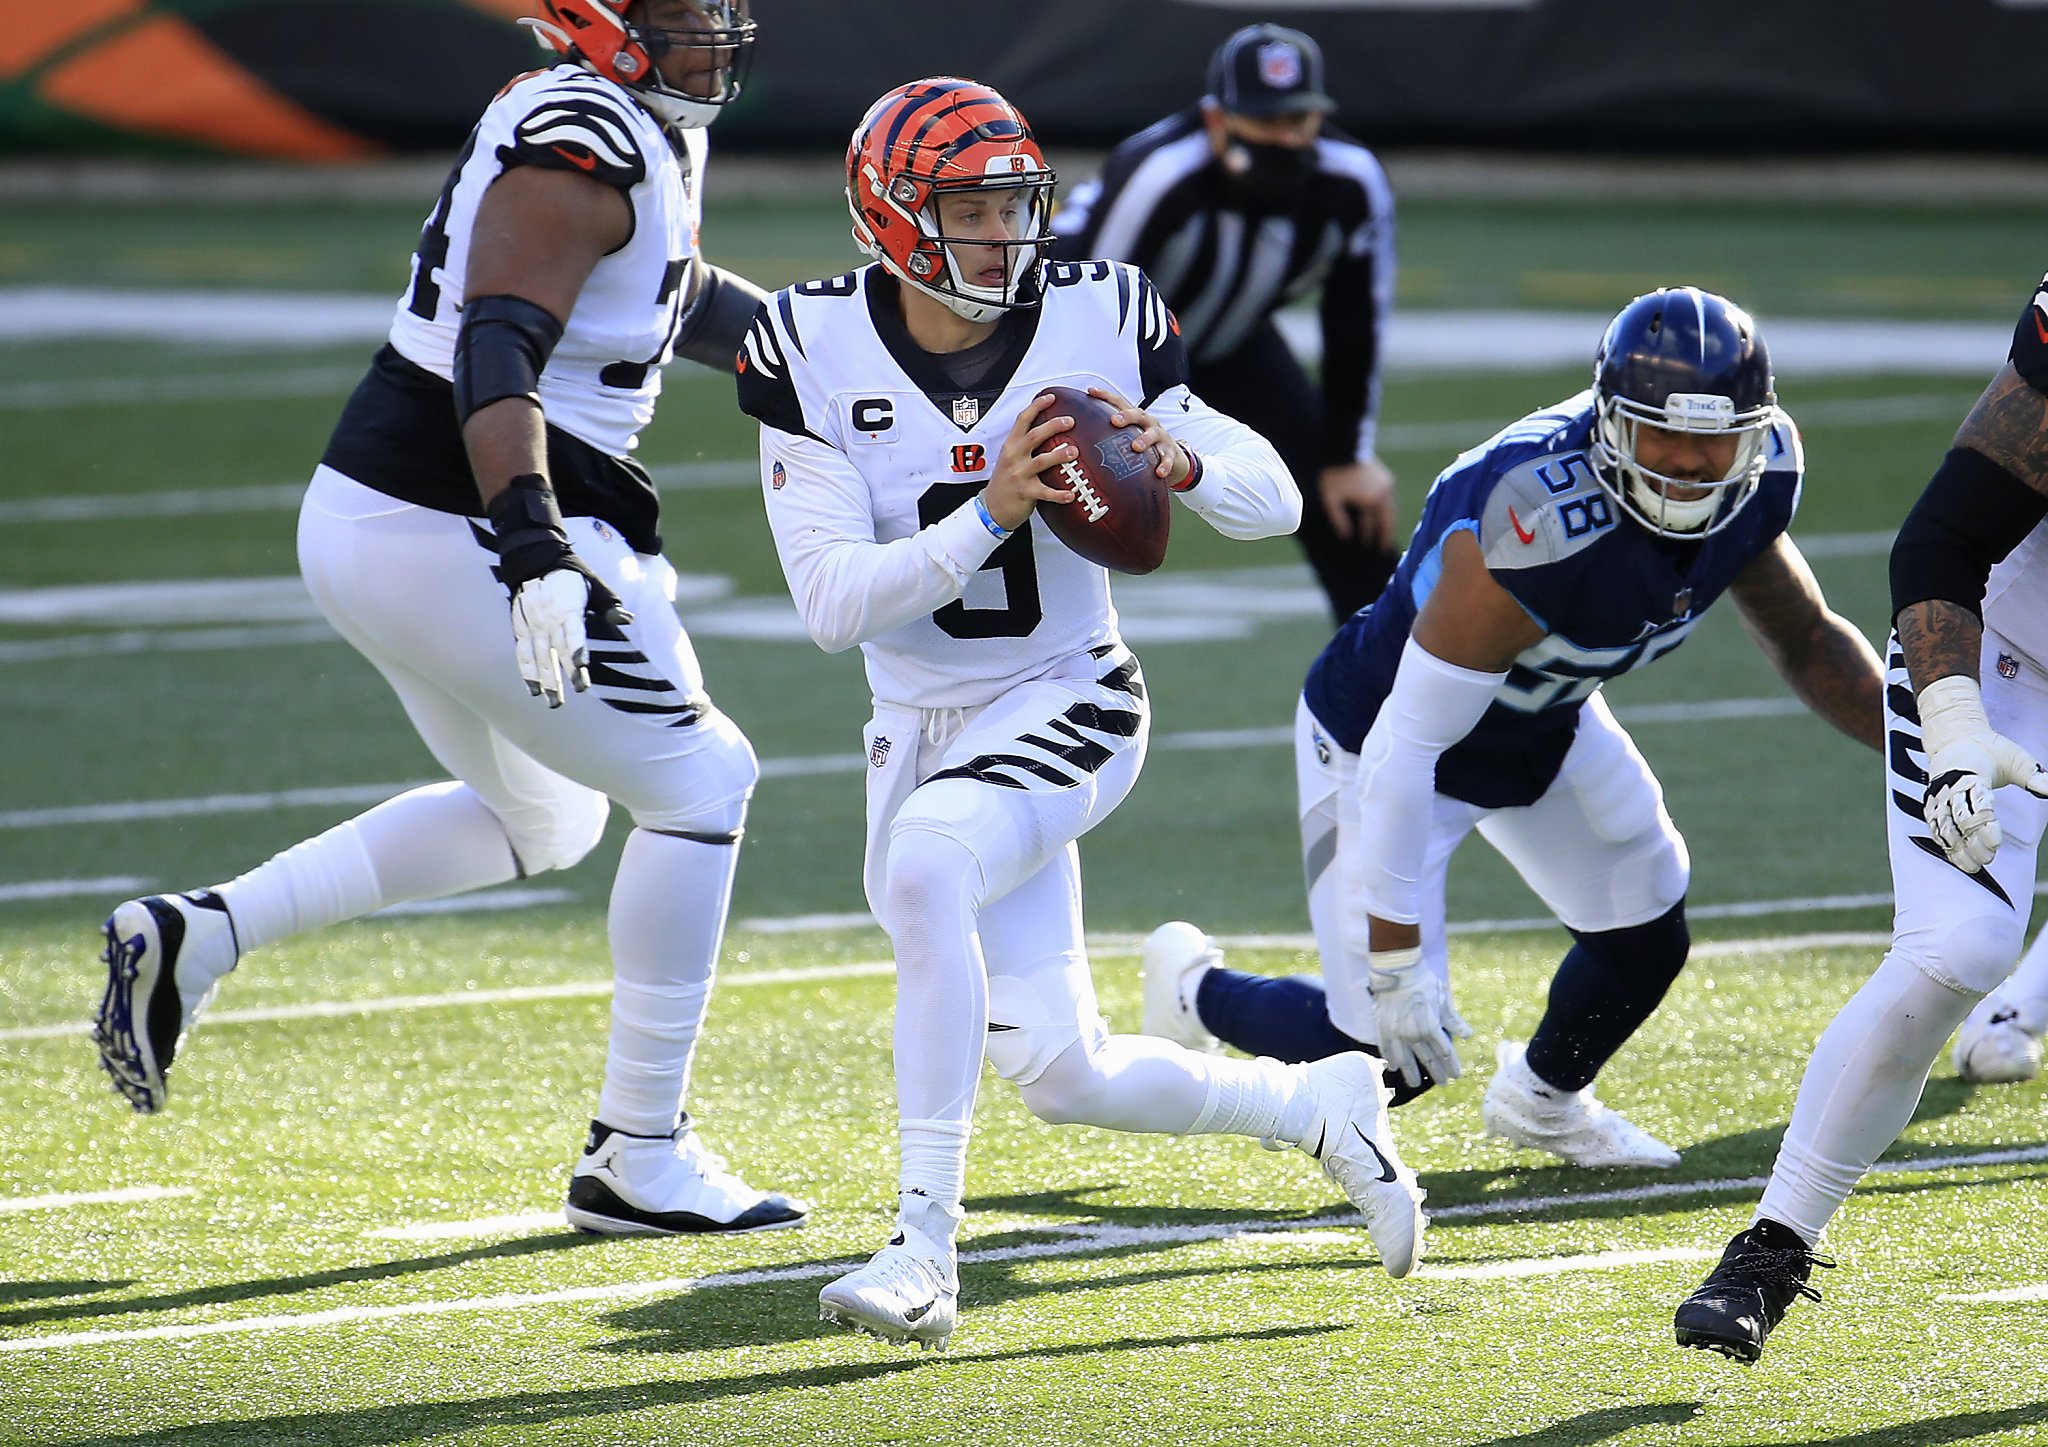 Raiders vs Bengals: How to watch and stream online